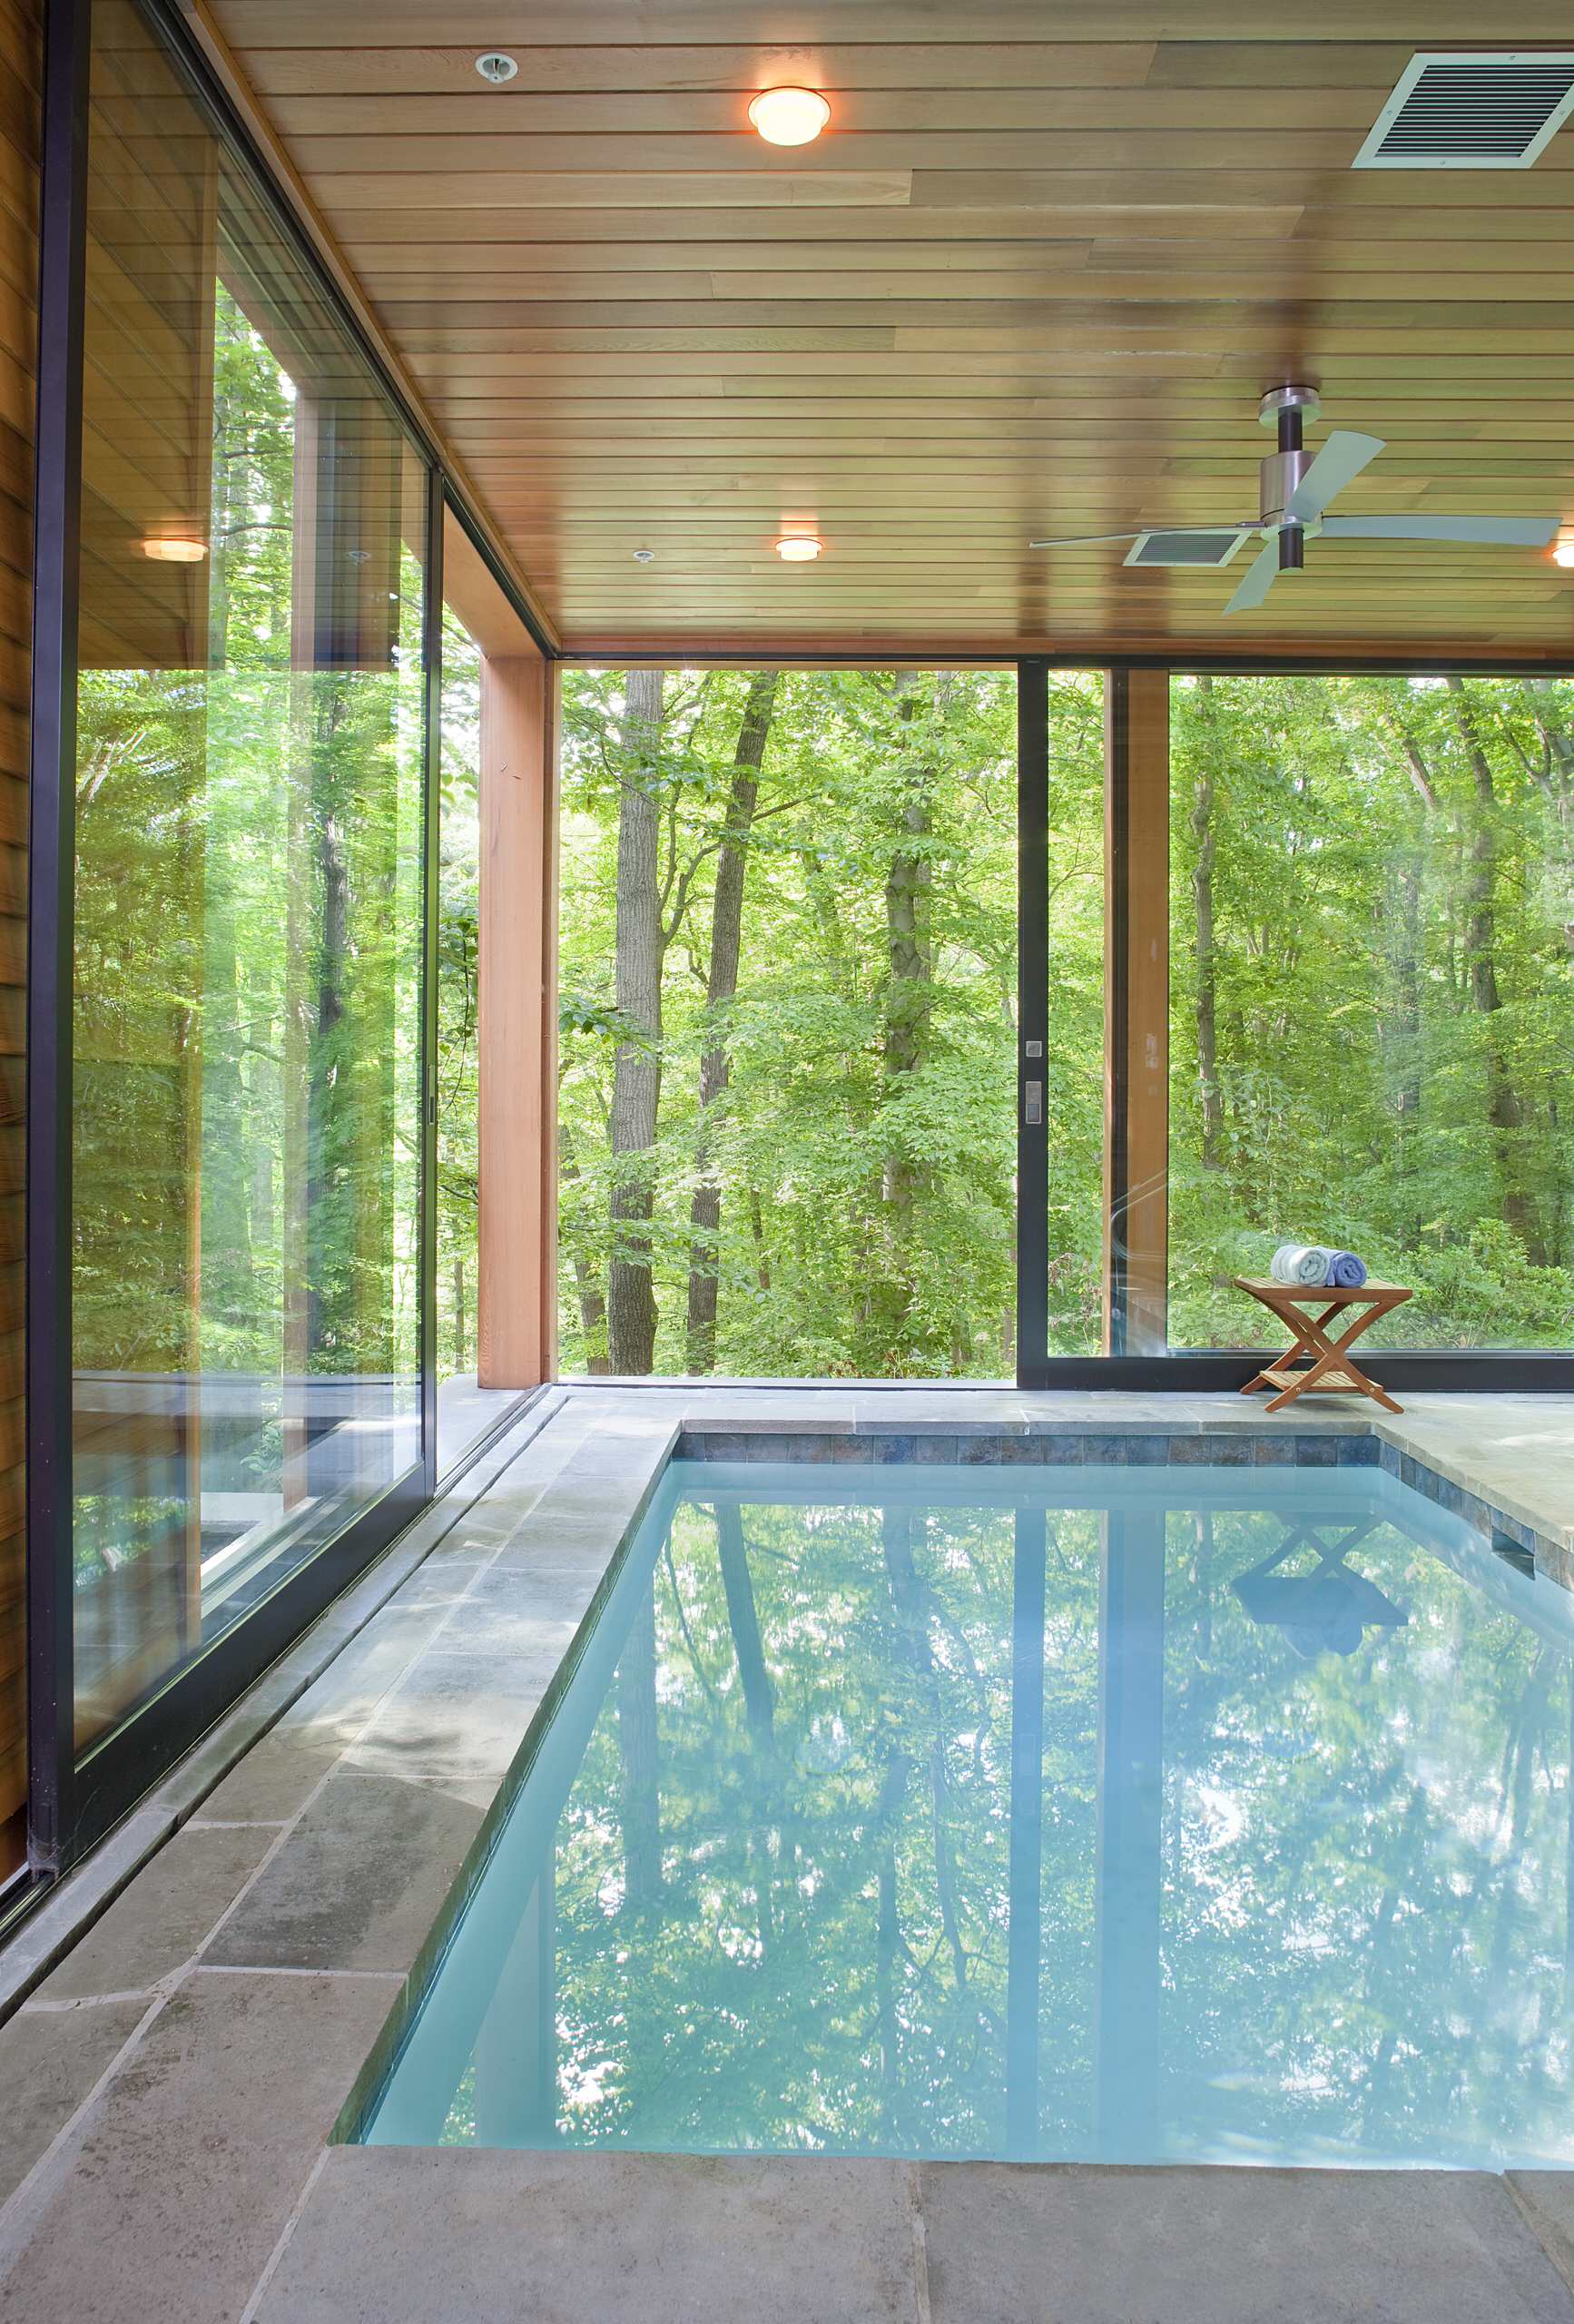 75 Beautiful Indoor Pool Pictures Ideas January 2021 Houzz